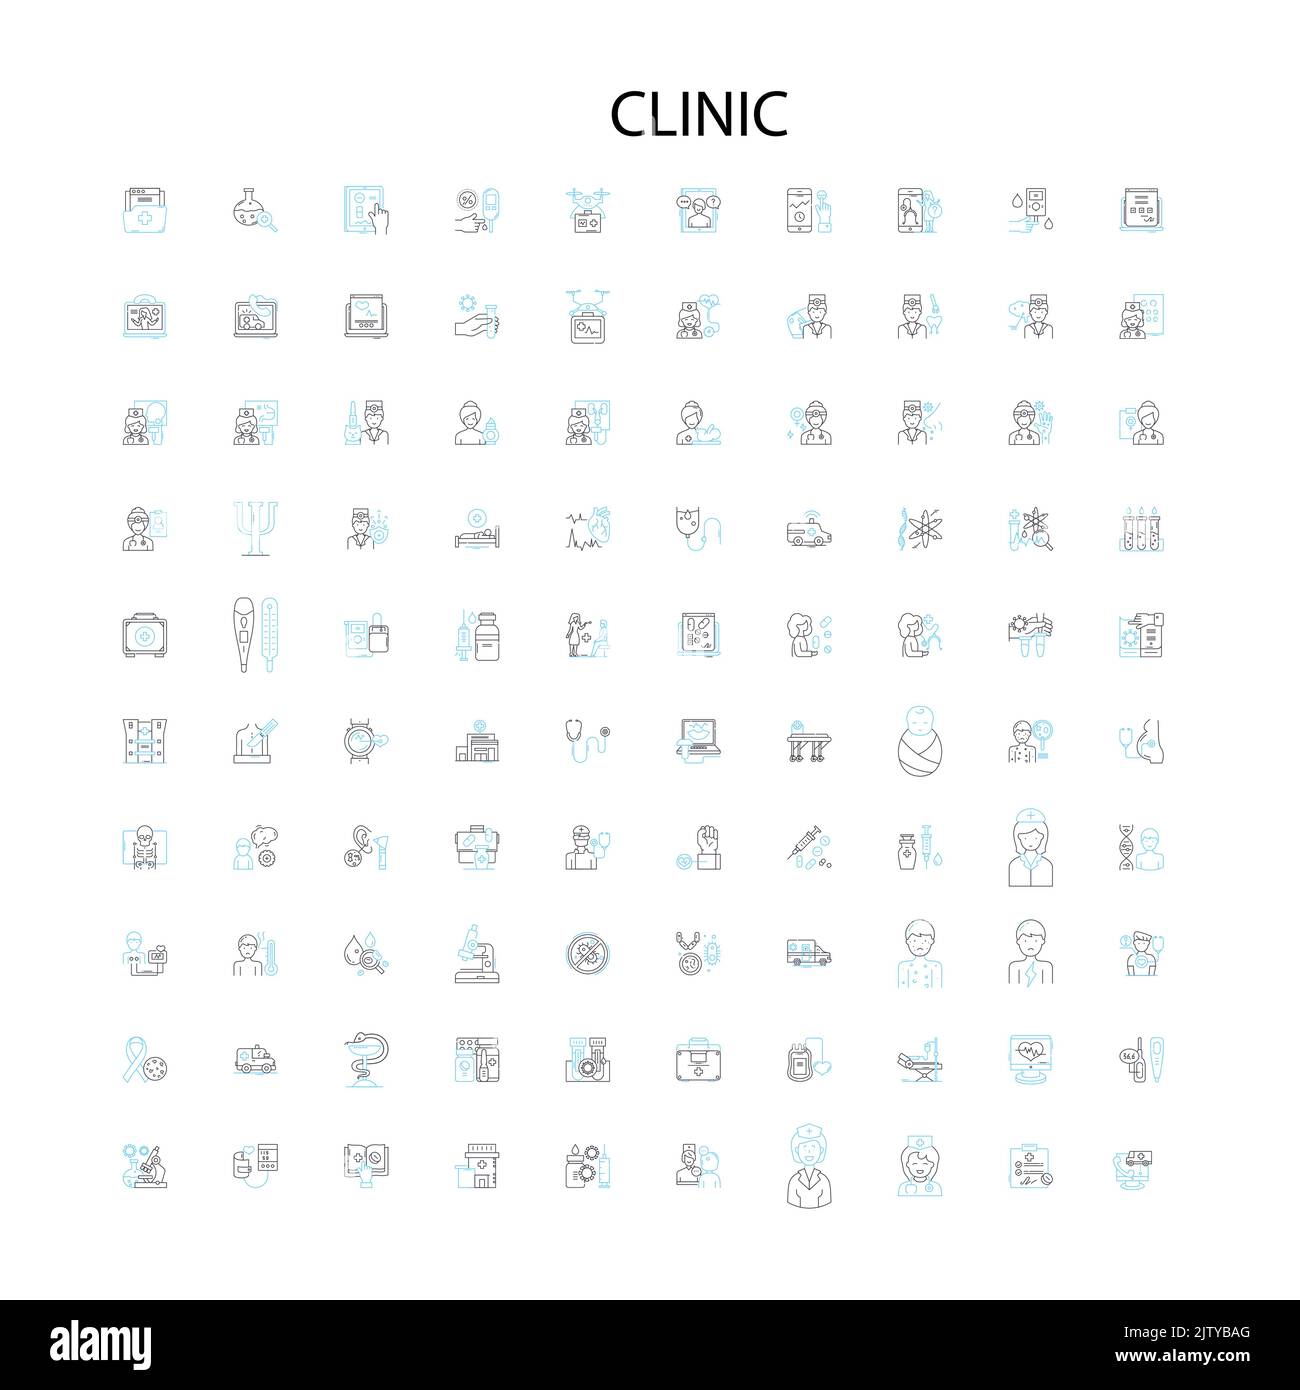 clinic icons, signs, outline symbols, concept linear illustration line collection Stock Vector